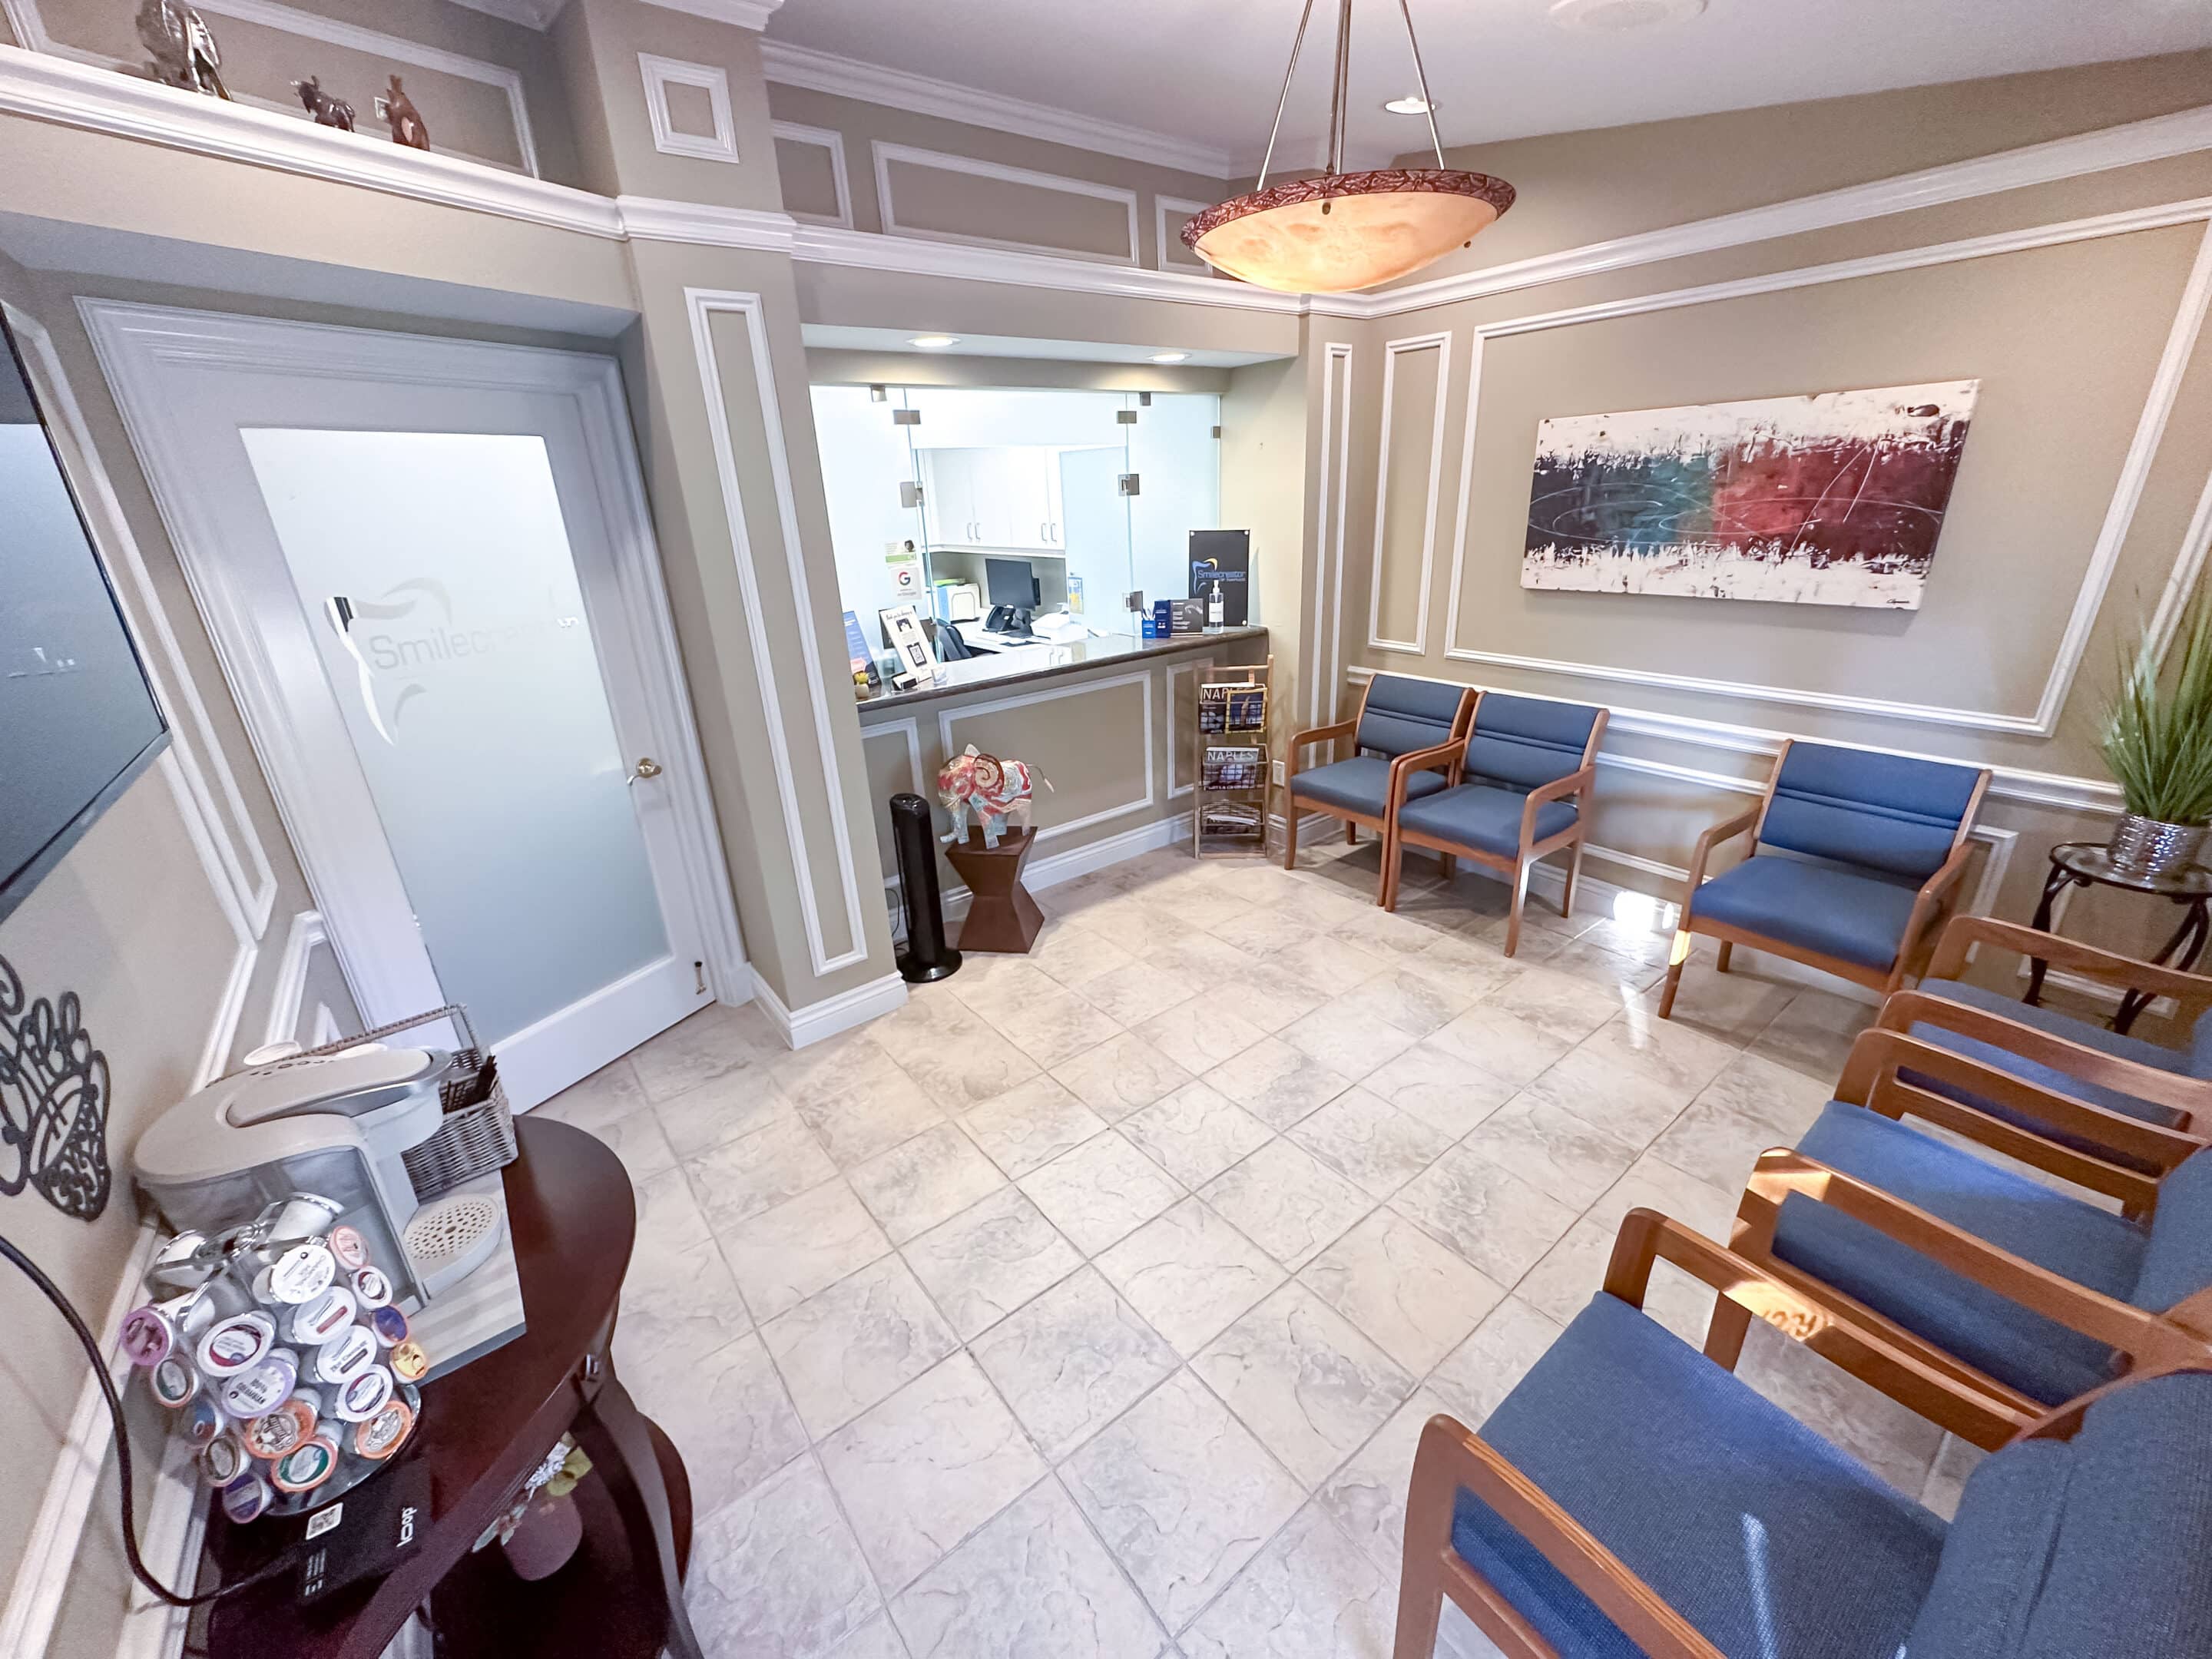 A view of the waiting room at Smilecreator's Naples location, where various cushioned chairs are arranged and the front desk can be seen. There is a coffee maker on a table and the edge of a television screen visible.